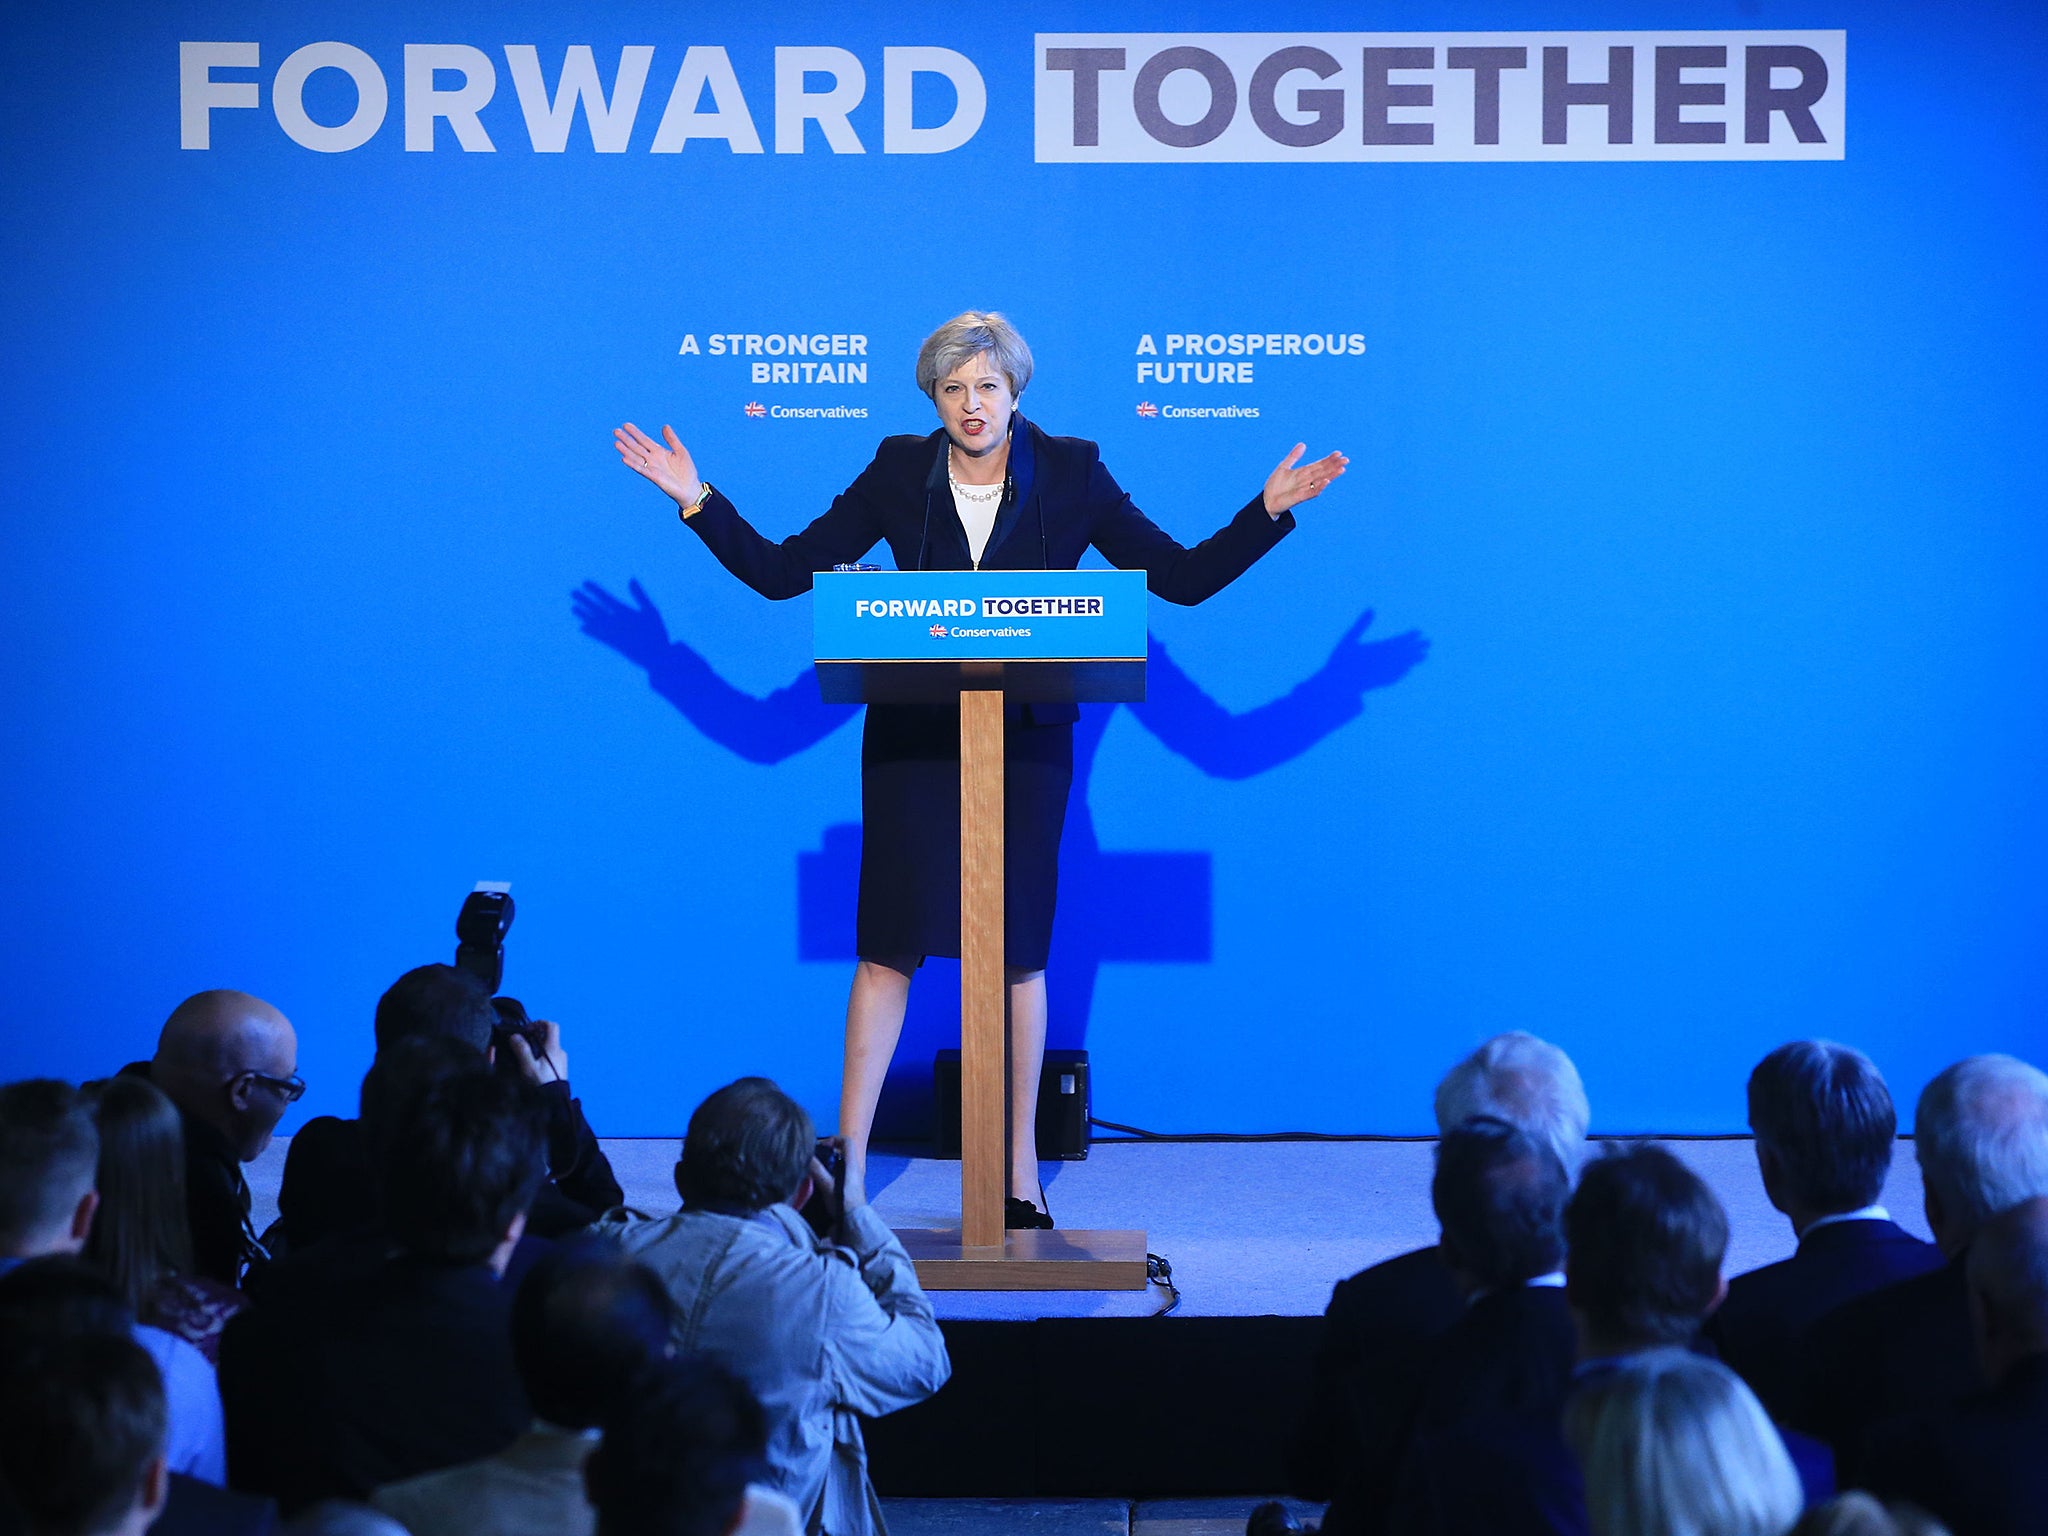 Theresa May unveiled the Conservative Party manifesto... and it didn’t make for comfortable reading for Britain’s pensioners